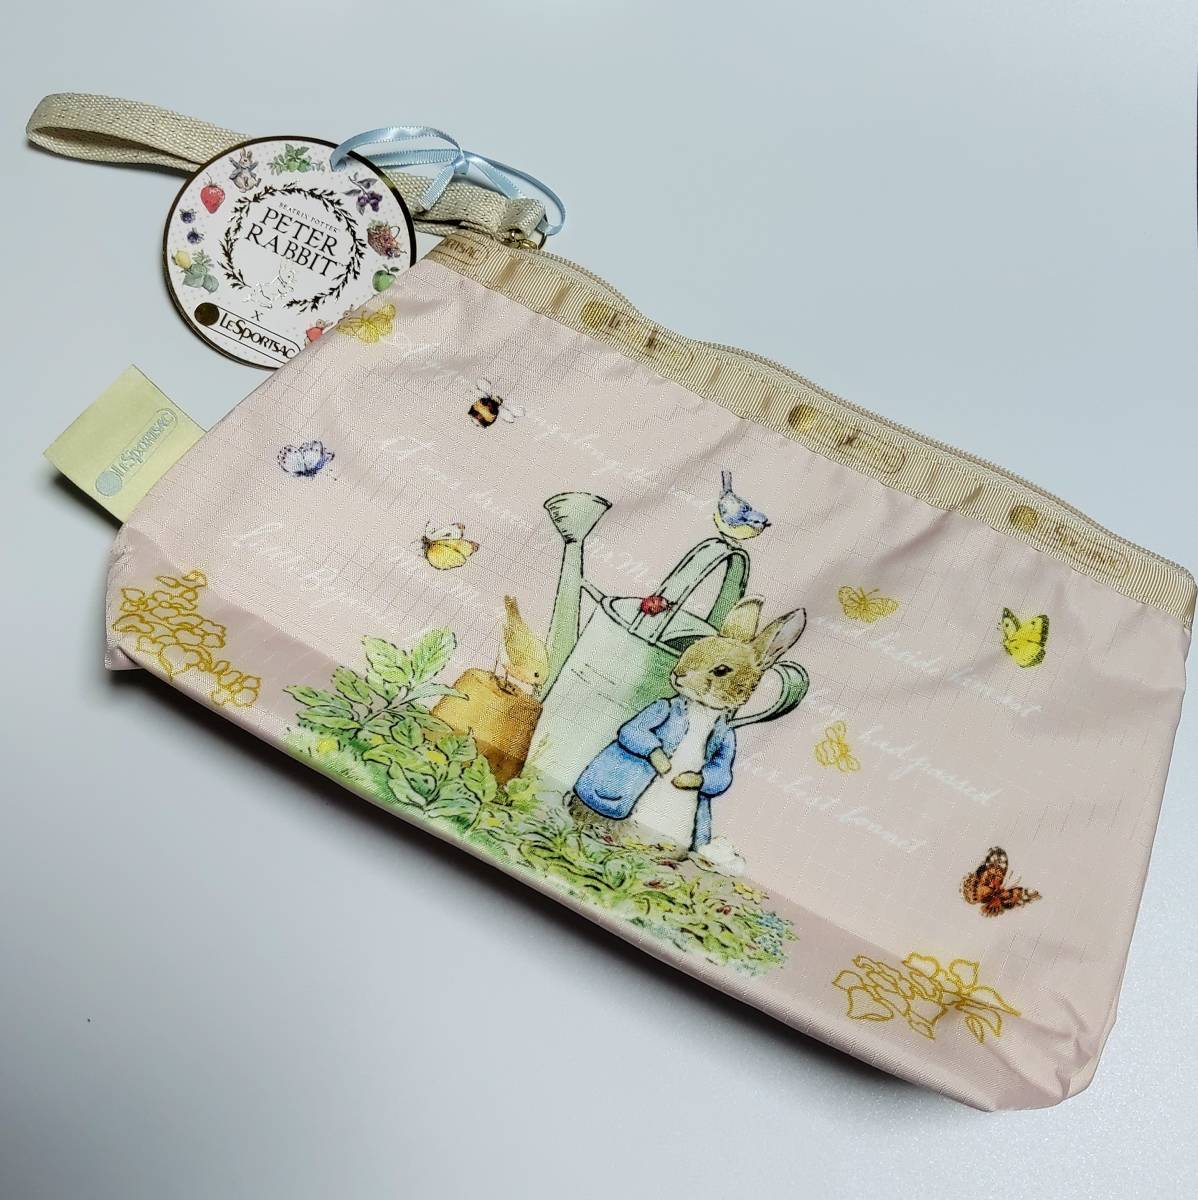 [ new goods unused ]LeSportsac Peter Rabbit collaboration pouch multi case Le Sportsac PETER RABBIT free shipping anonymity delivery 